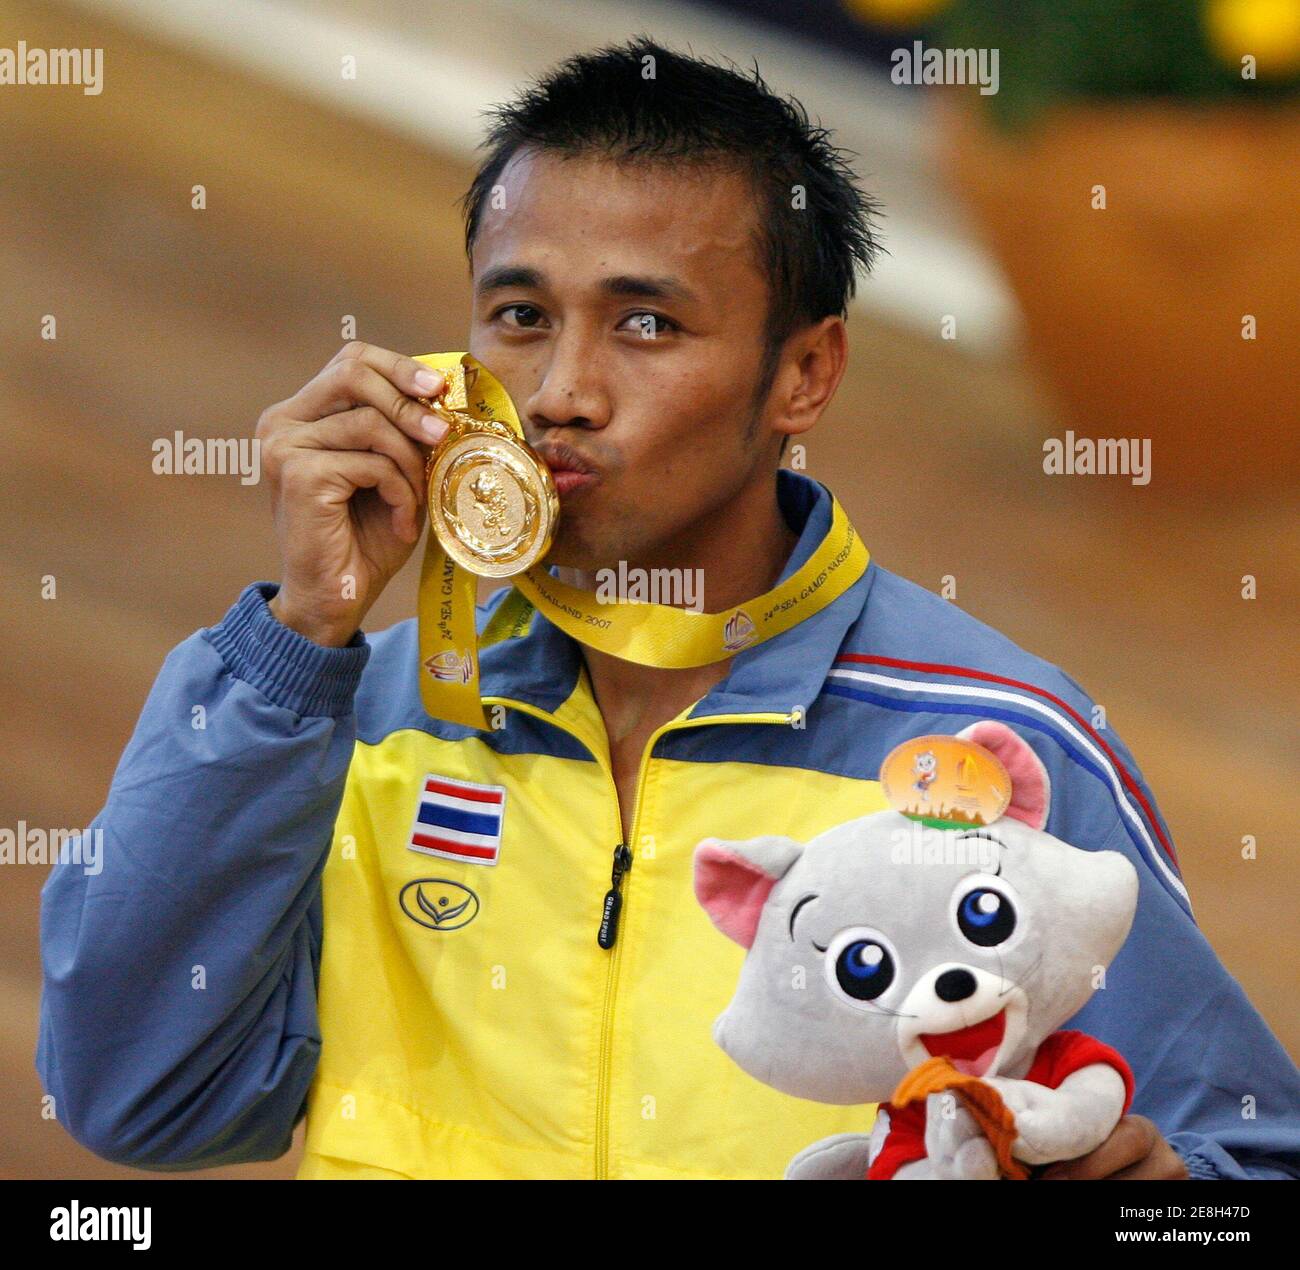 Thailand's Manus Boonjamnong kisses his gold medal after his win over Philippines' Larry Semillano during the Men's Lt. welter weight 64kg boxing final at the SEA Games in Nakhon Ratchasima December 13, 2007.     REUTERS/Chaiwat Subprasom (THAILAND) Stock Photo